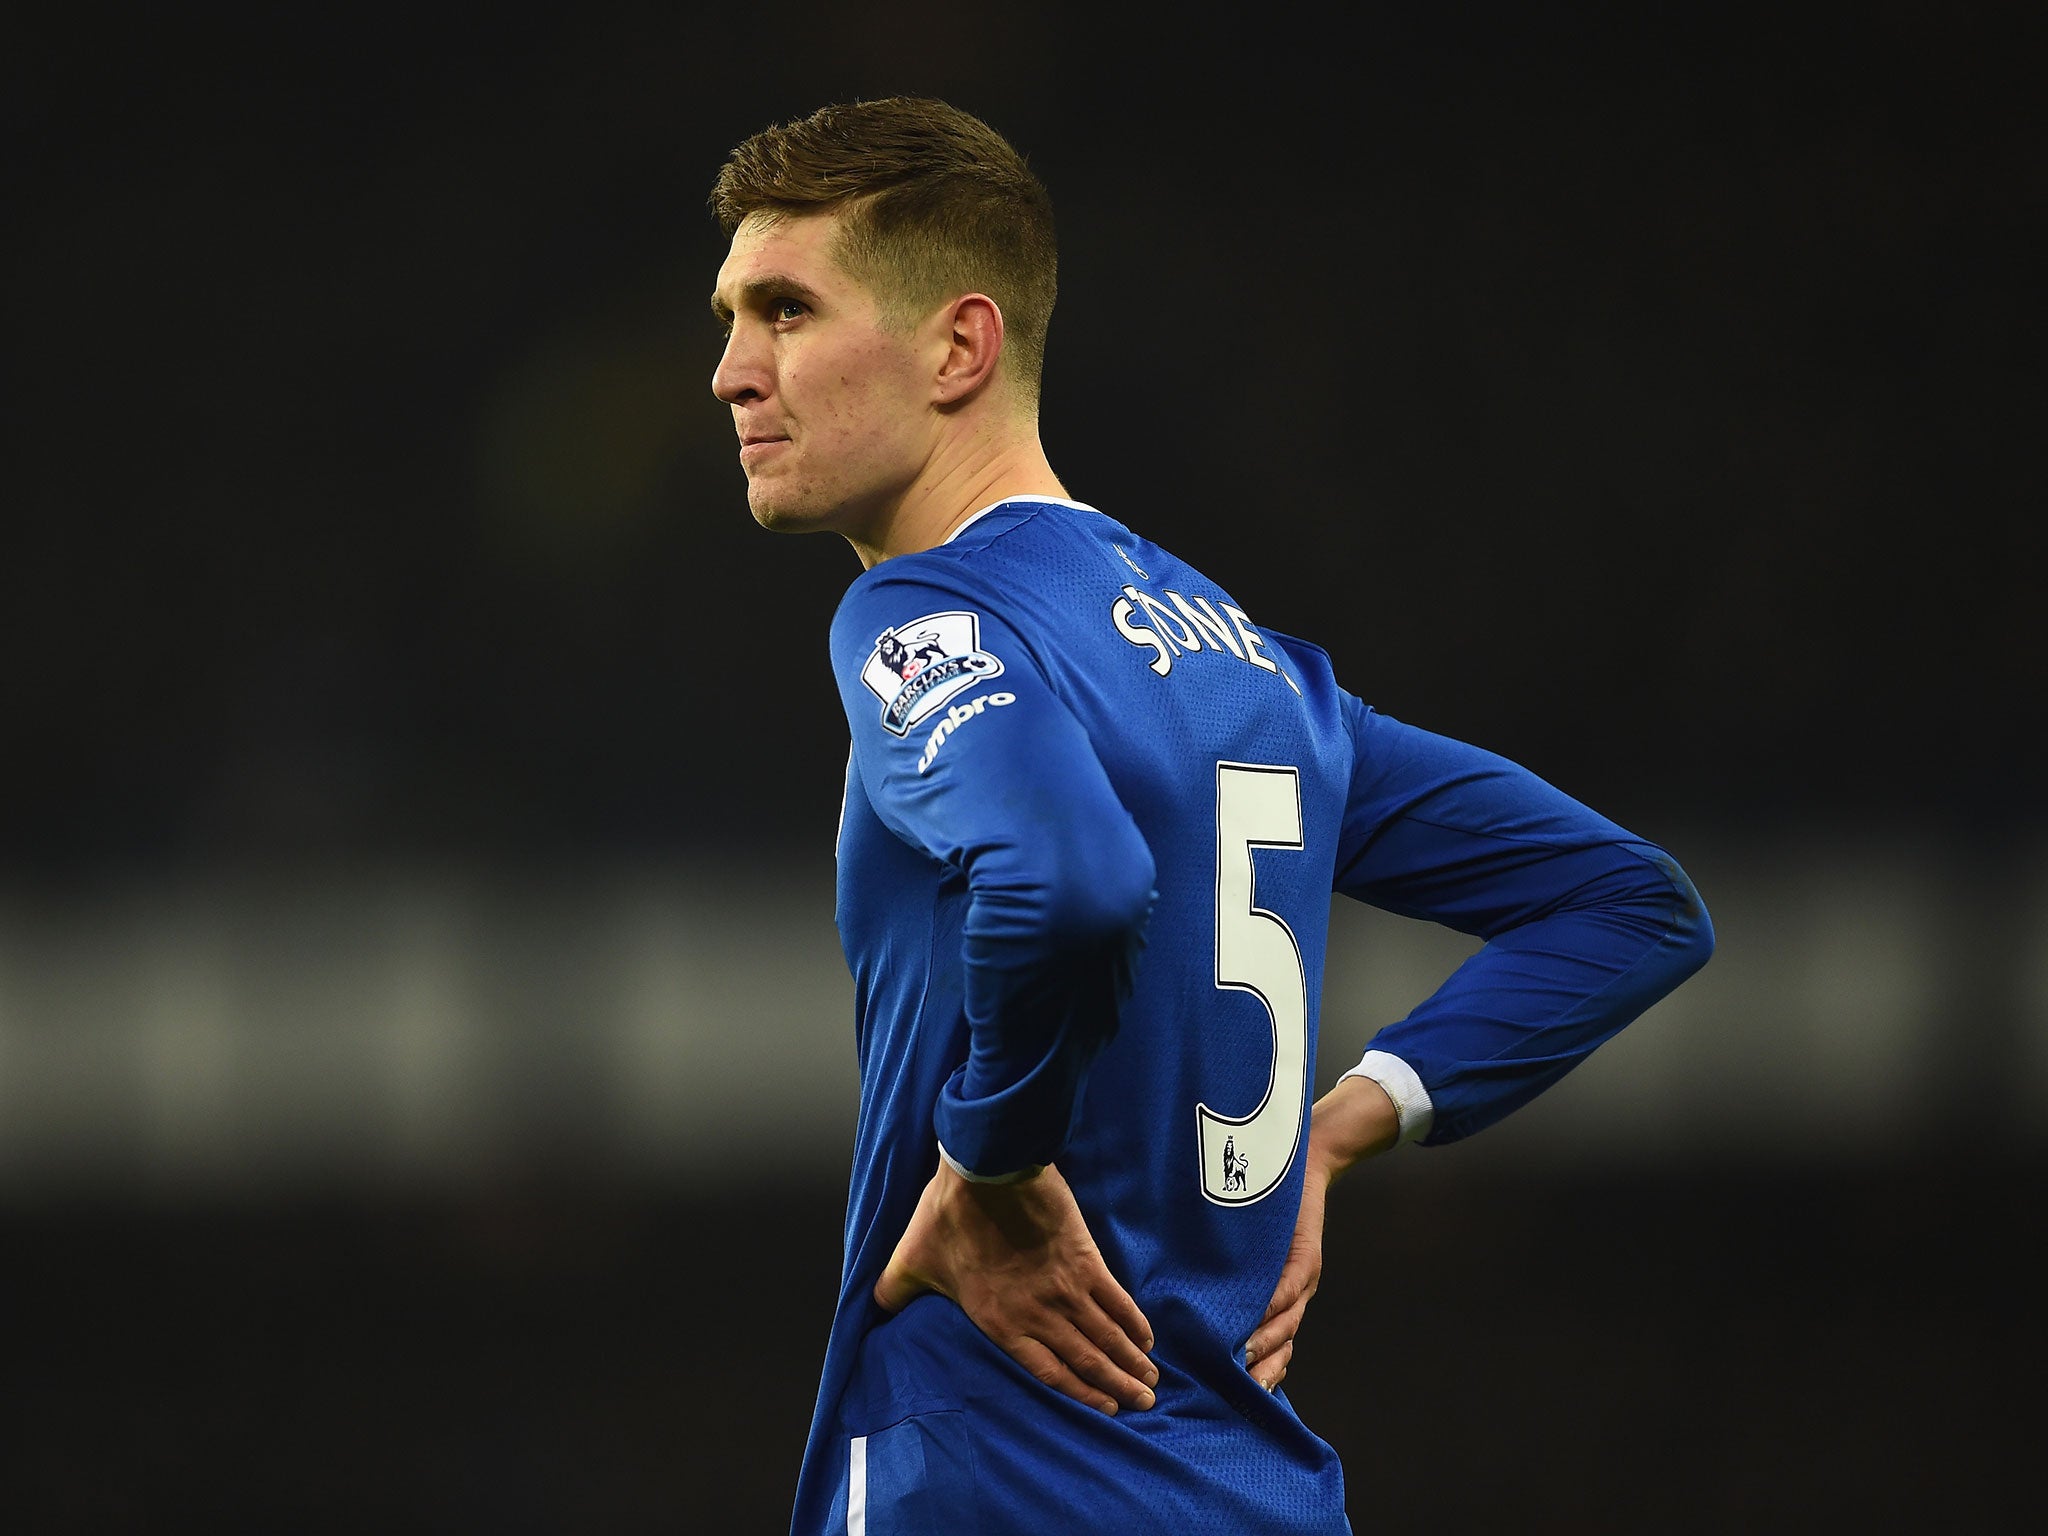 John Stones has been linked with a move to Manchester City